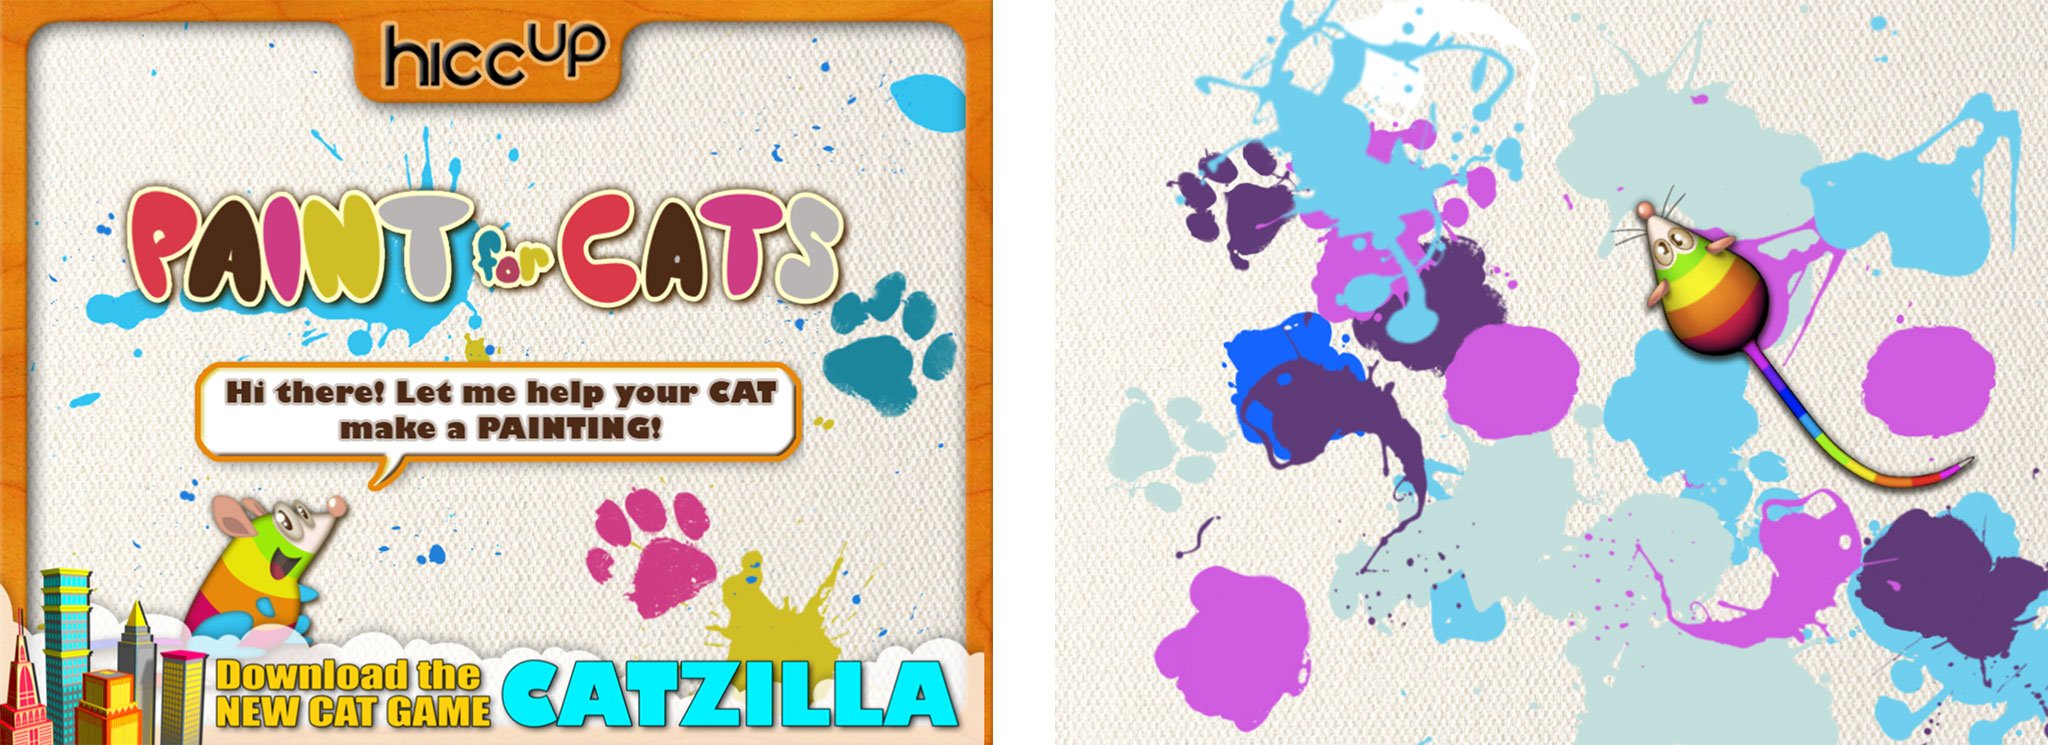 Best iPad apps for cats: Paint for Cats